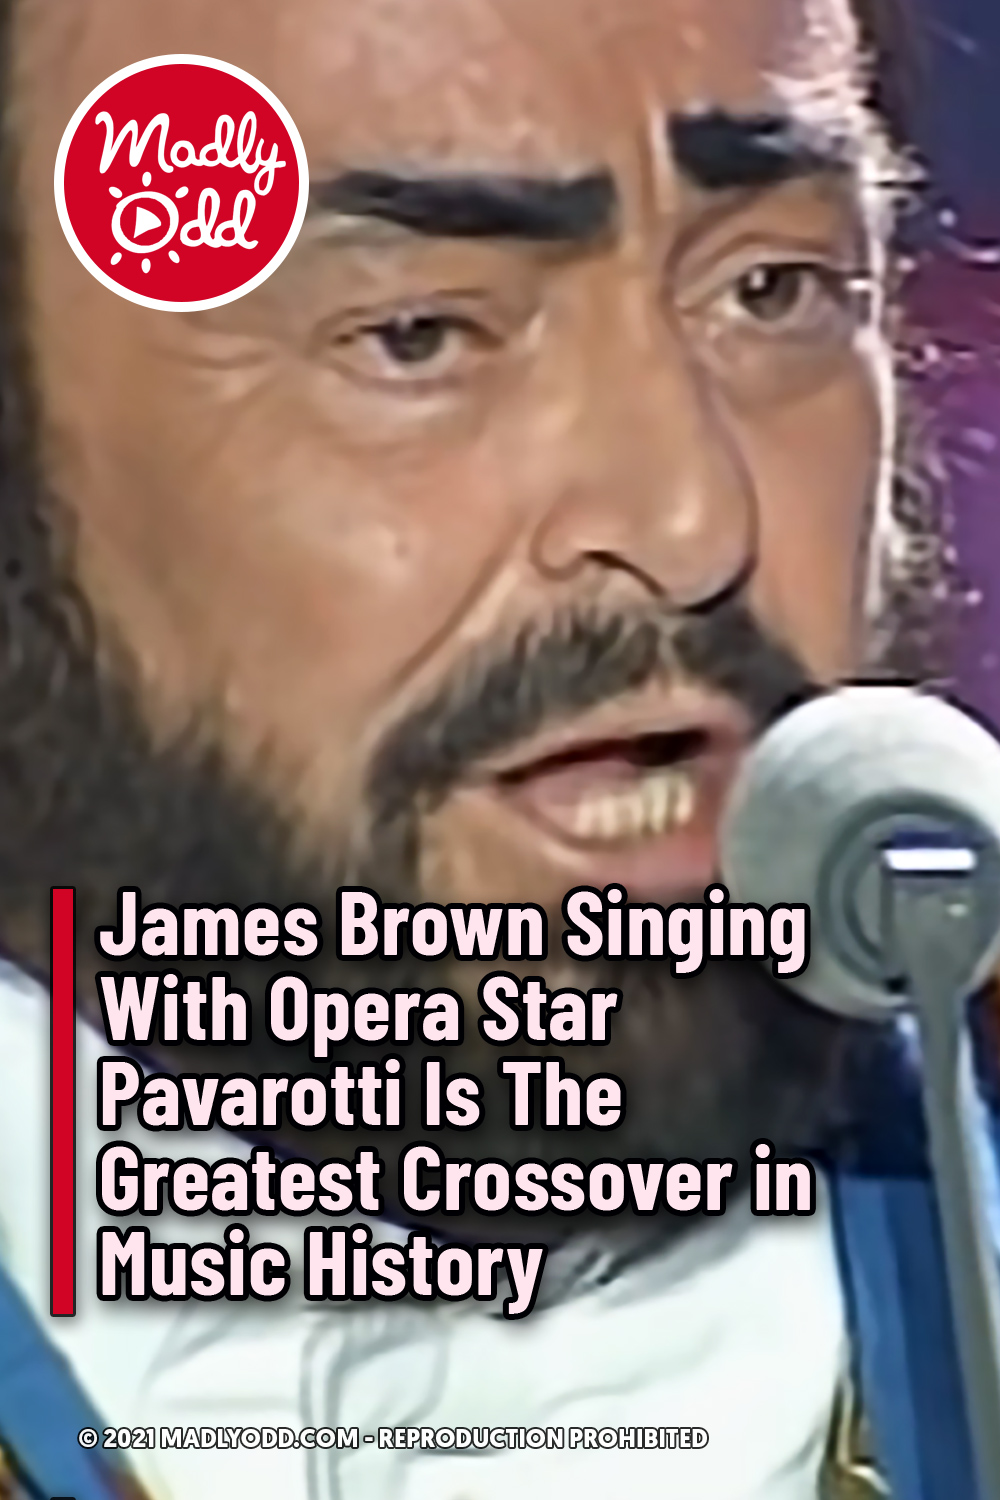 James Brown Singing With Opera Star Pavarotti Is The Greatest Crossover in Music History